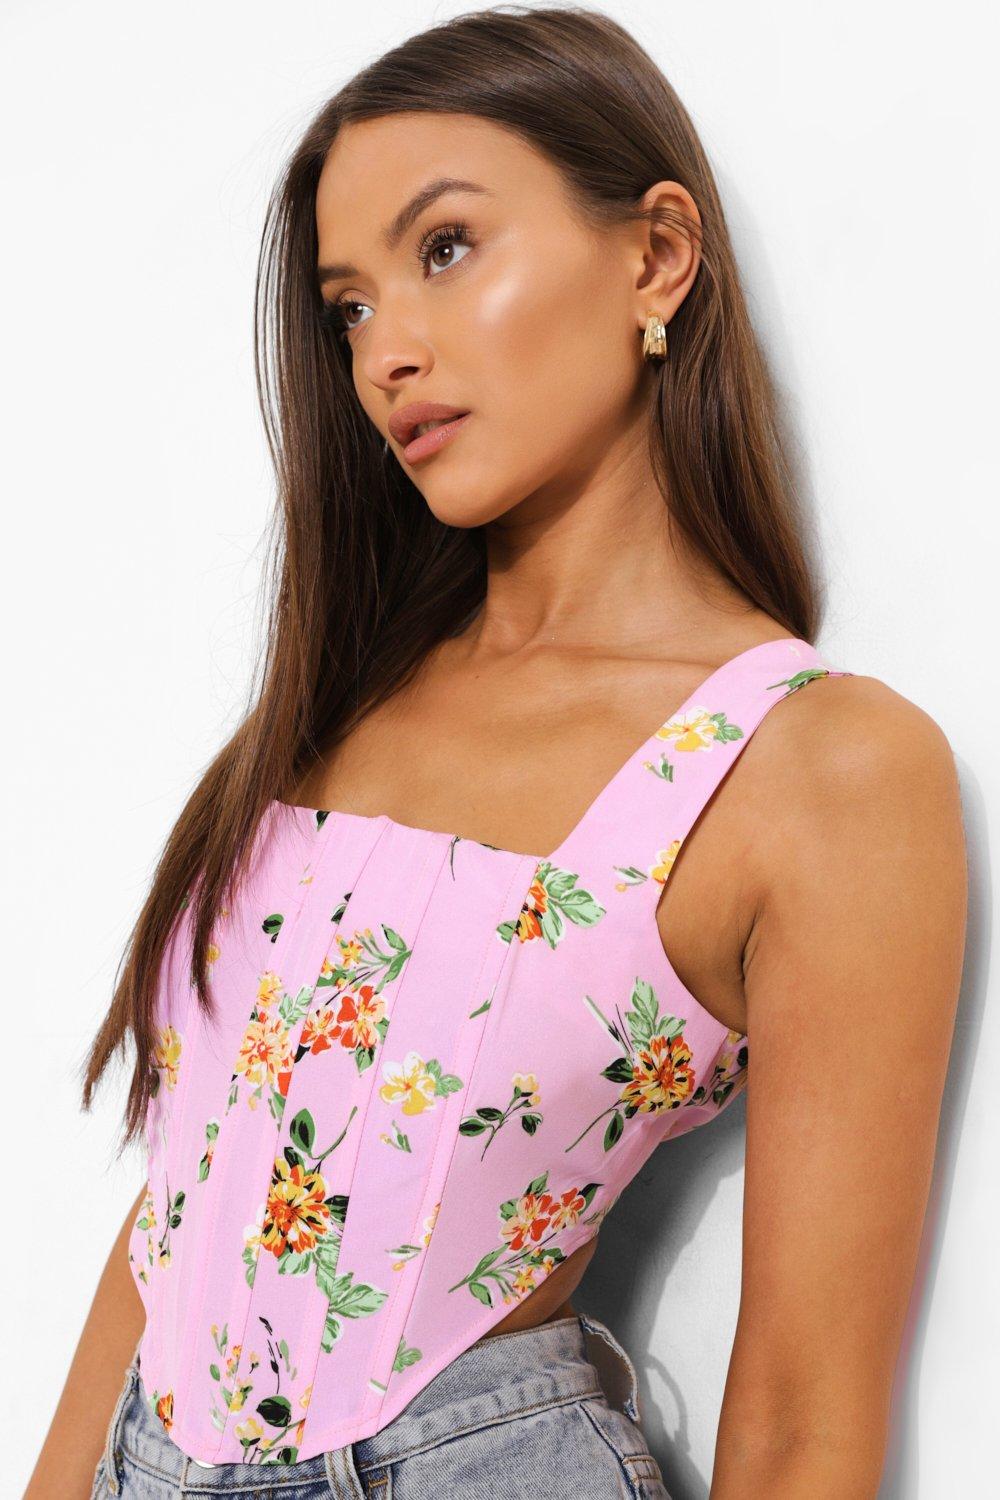 Square Neck Summer Crop Top Floral Embroidery Corset With